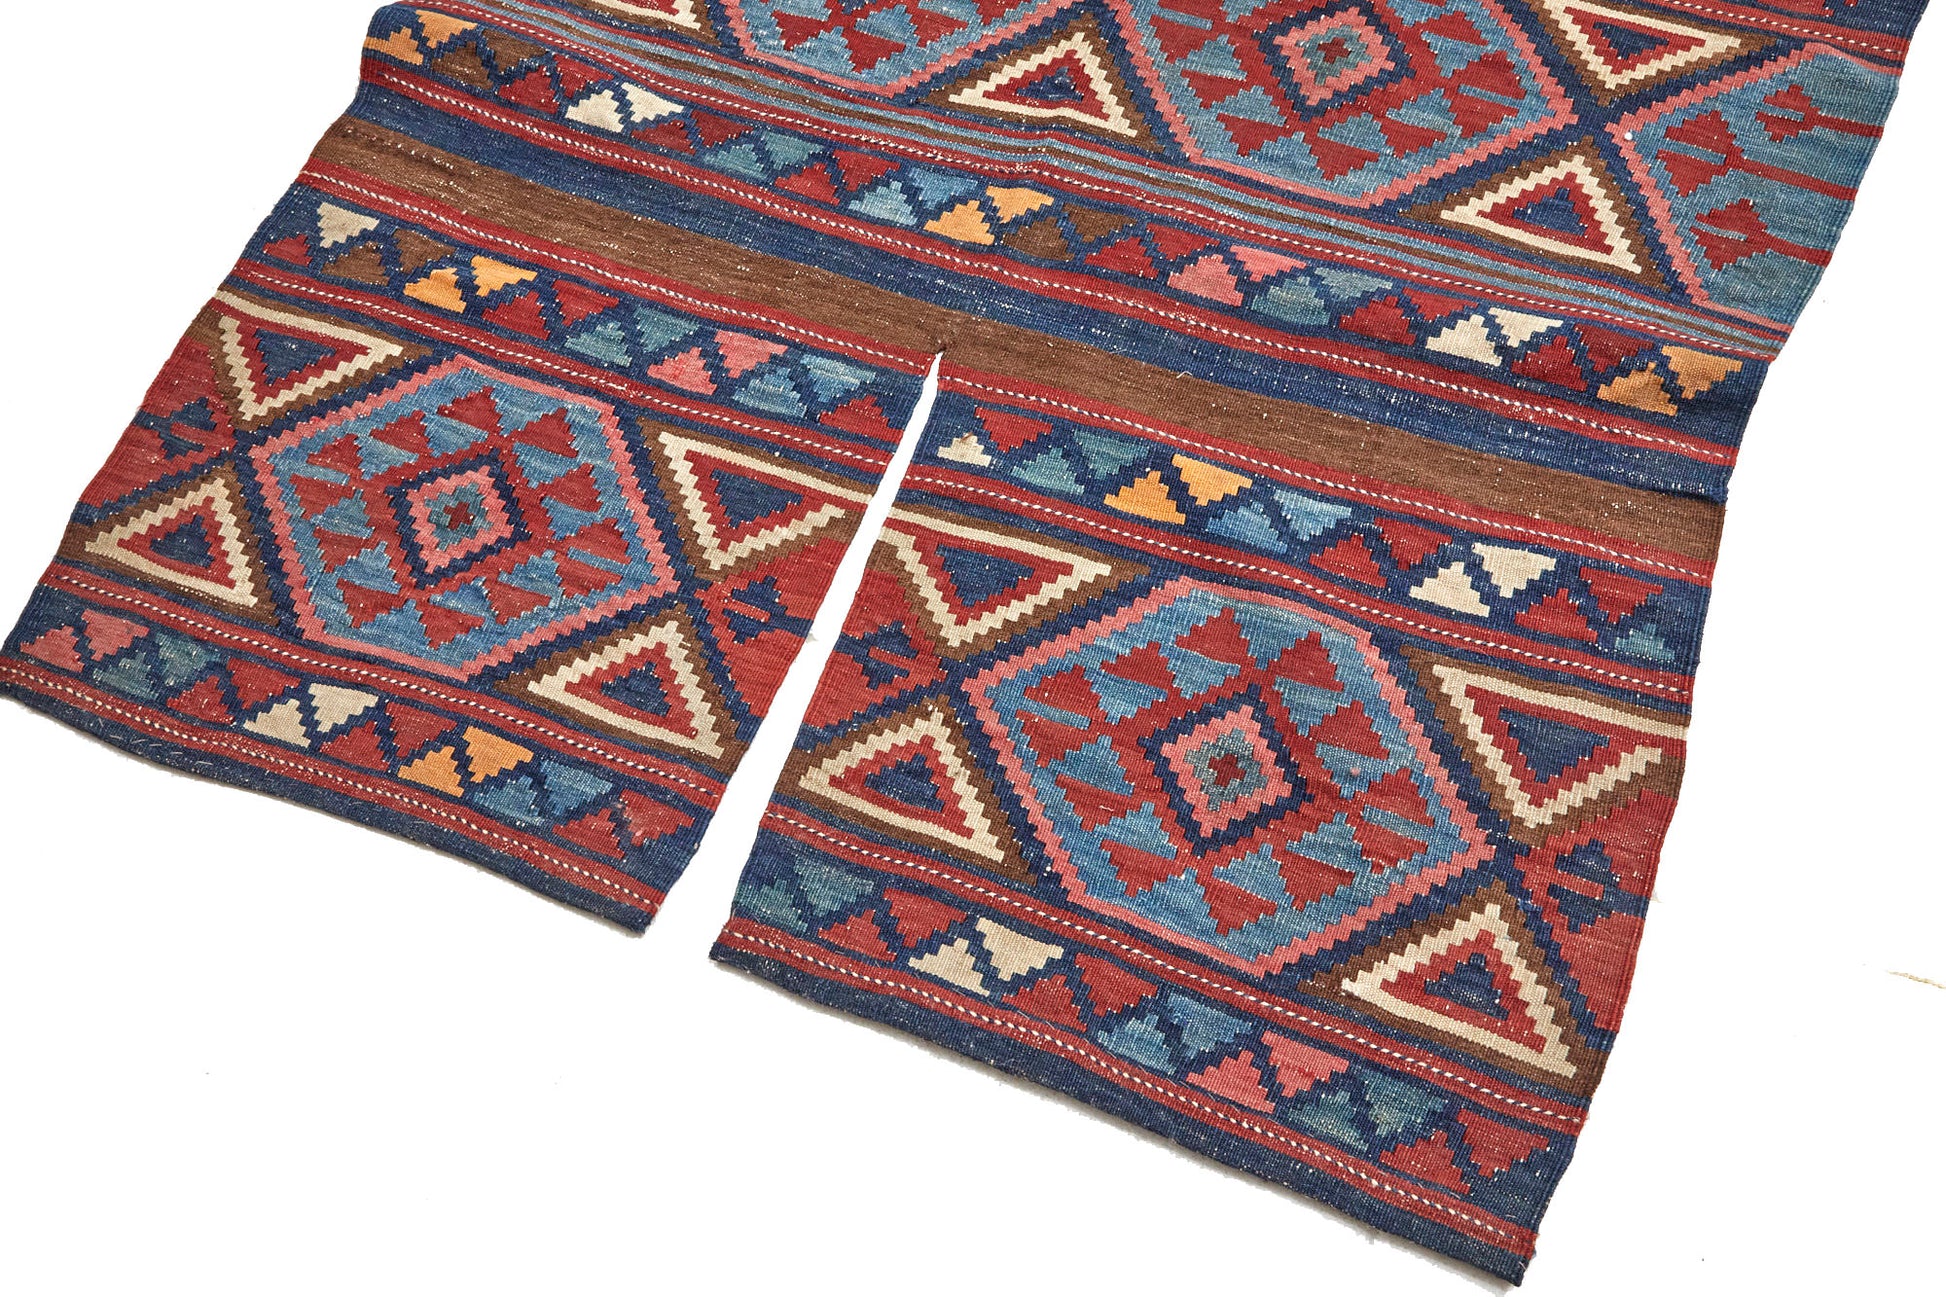 Multi-colored hand woven kilim Persian rug with zig zag and triangle designs - Available from King Kennedy Rugs Los Angeles 